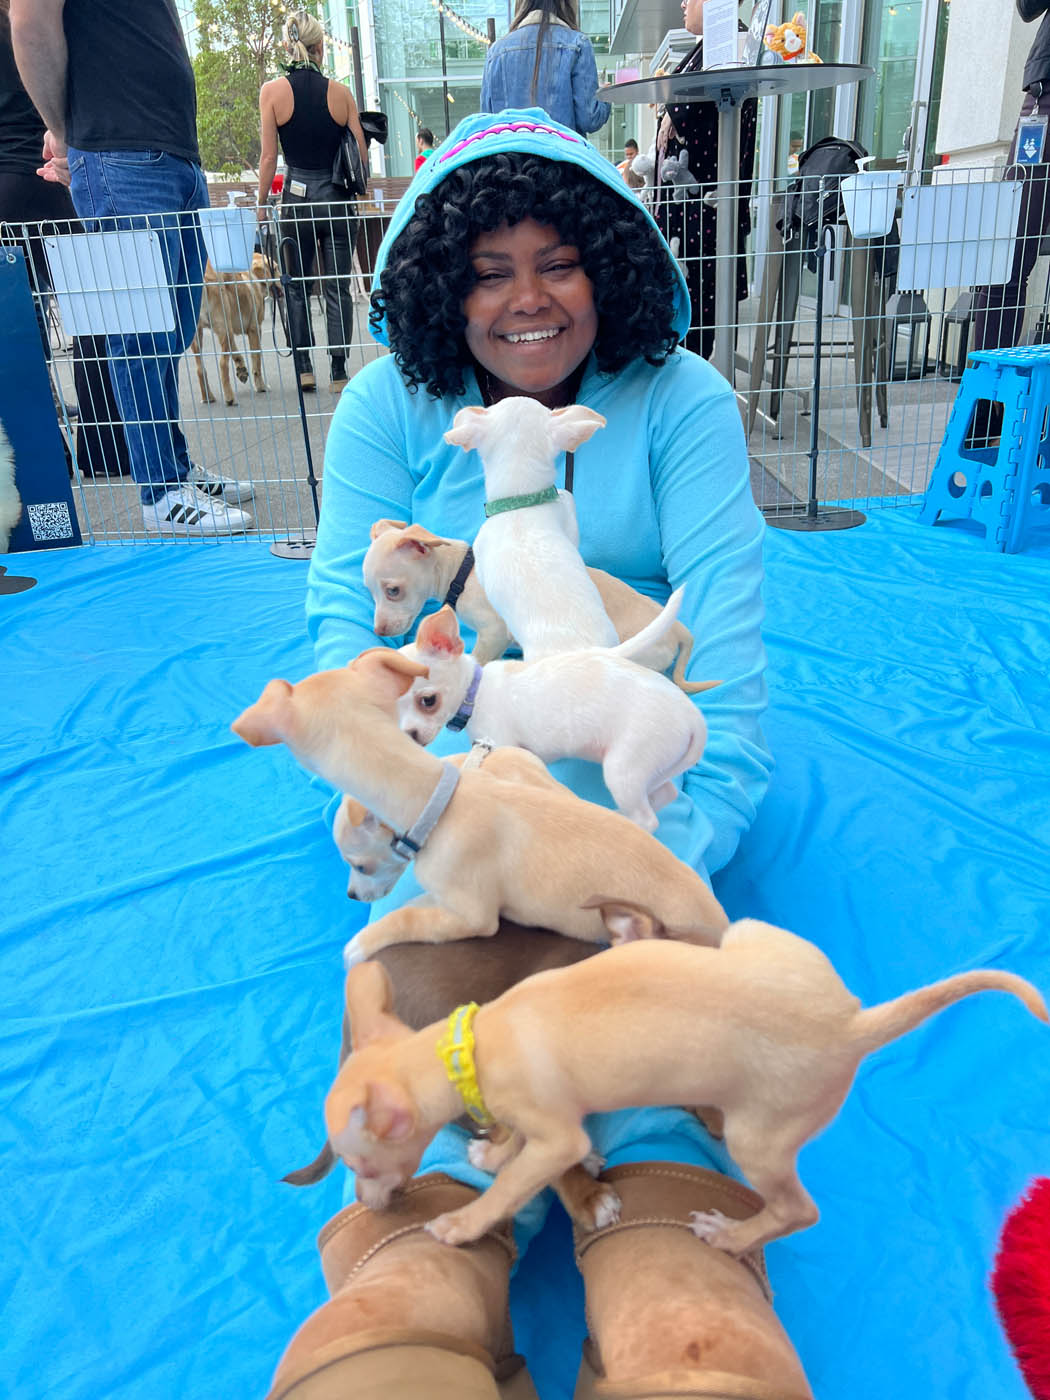 Woman in teal jacket with so many puppies on her lap at googleween celebration.